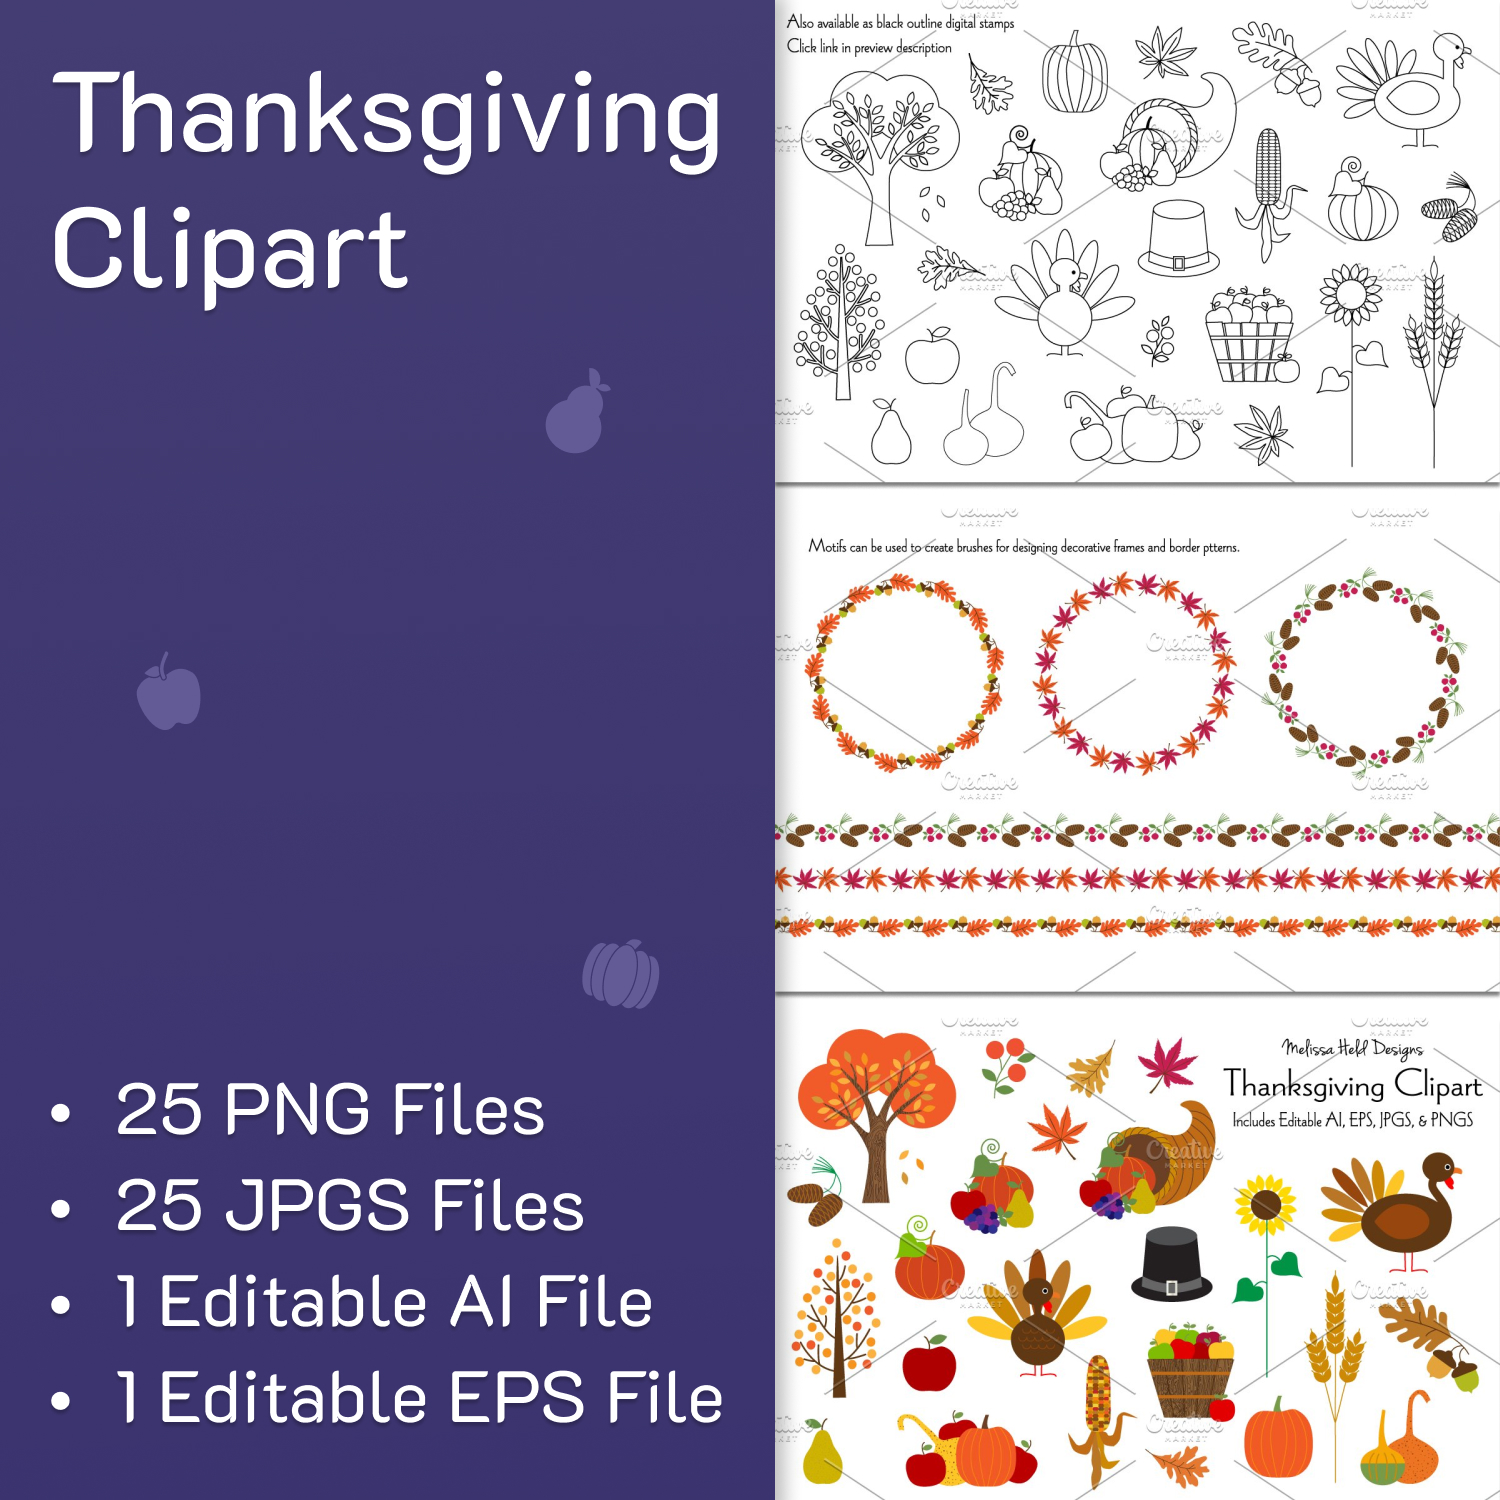 Preview thanksgiving clipart.